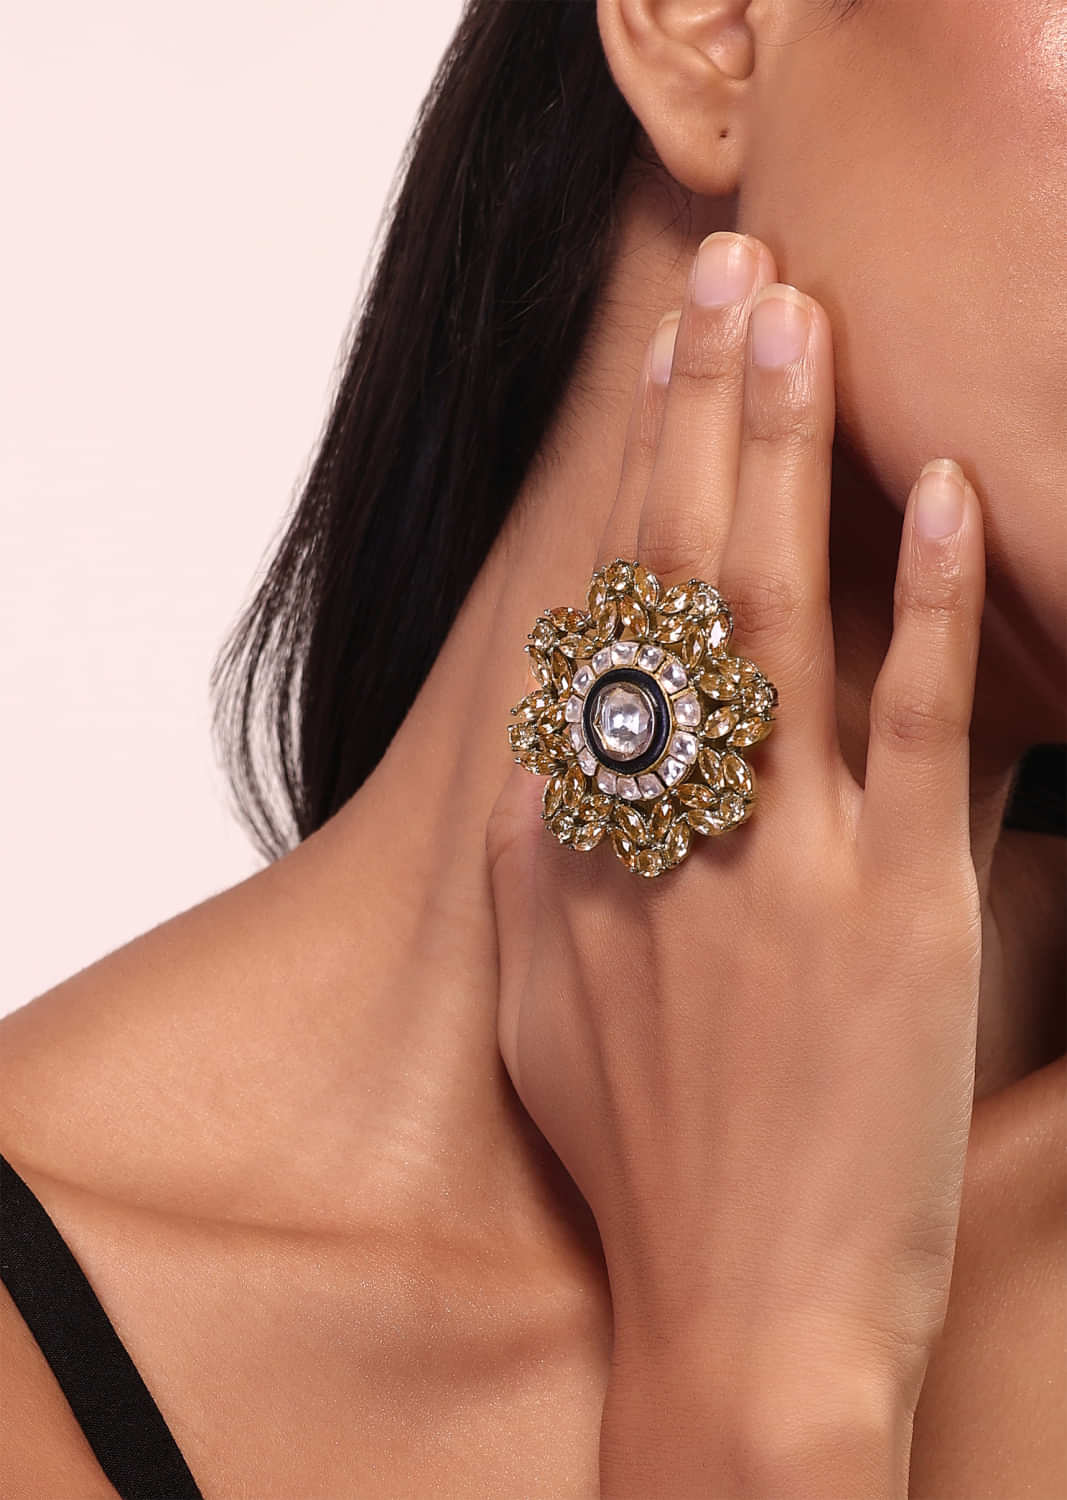 Oversized Diamond Ring In A Floral Attachment